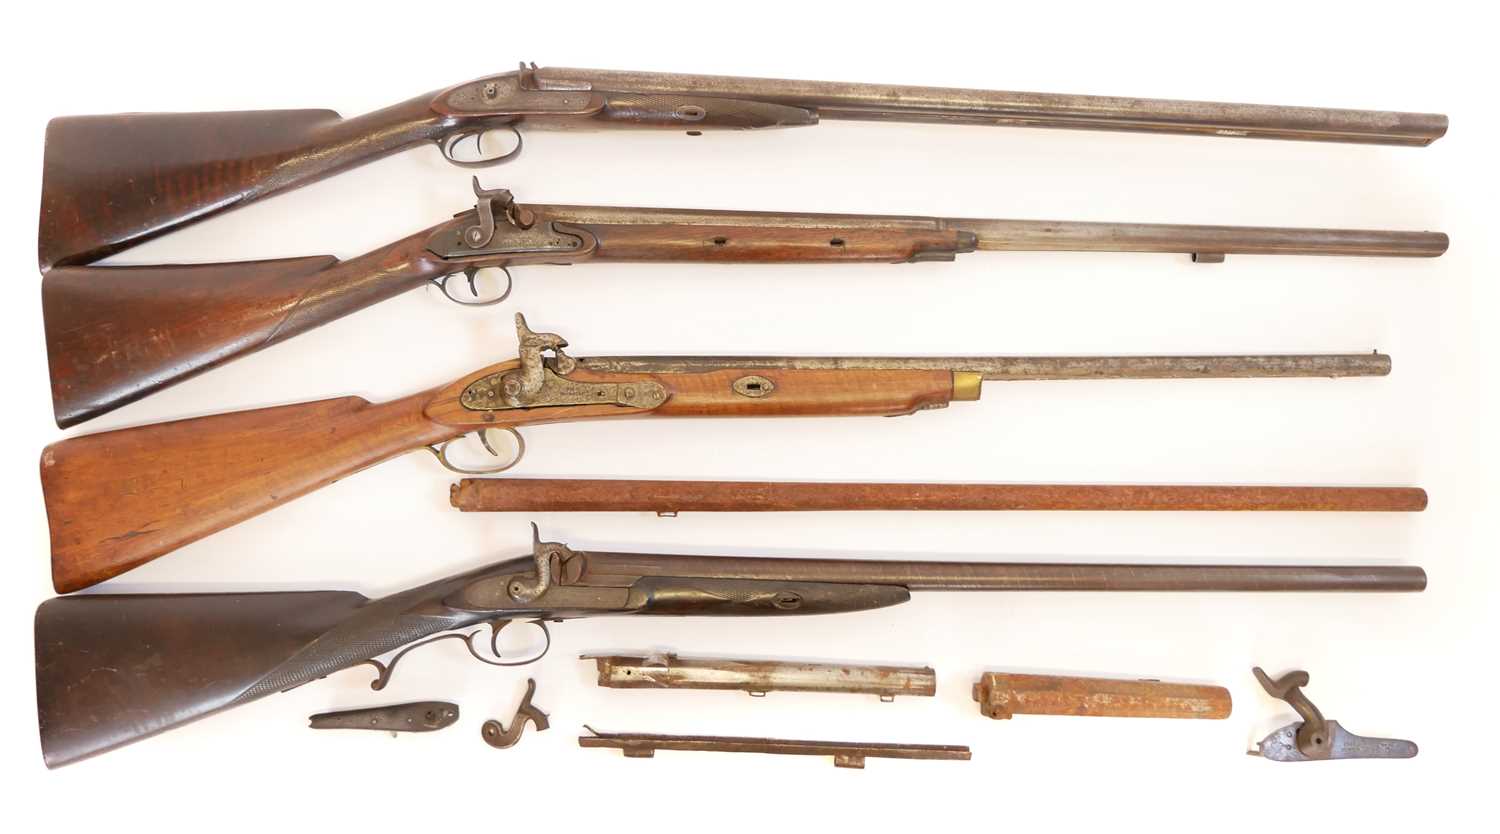 Four percussion shotguns for restoration, one a double barrel, the other three single barrels one by